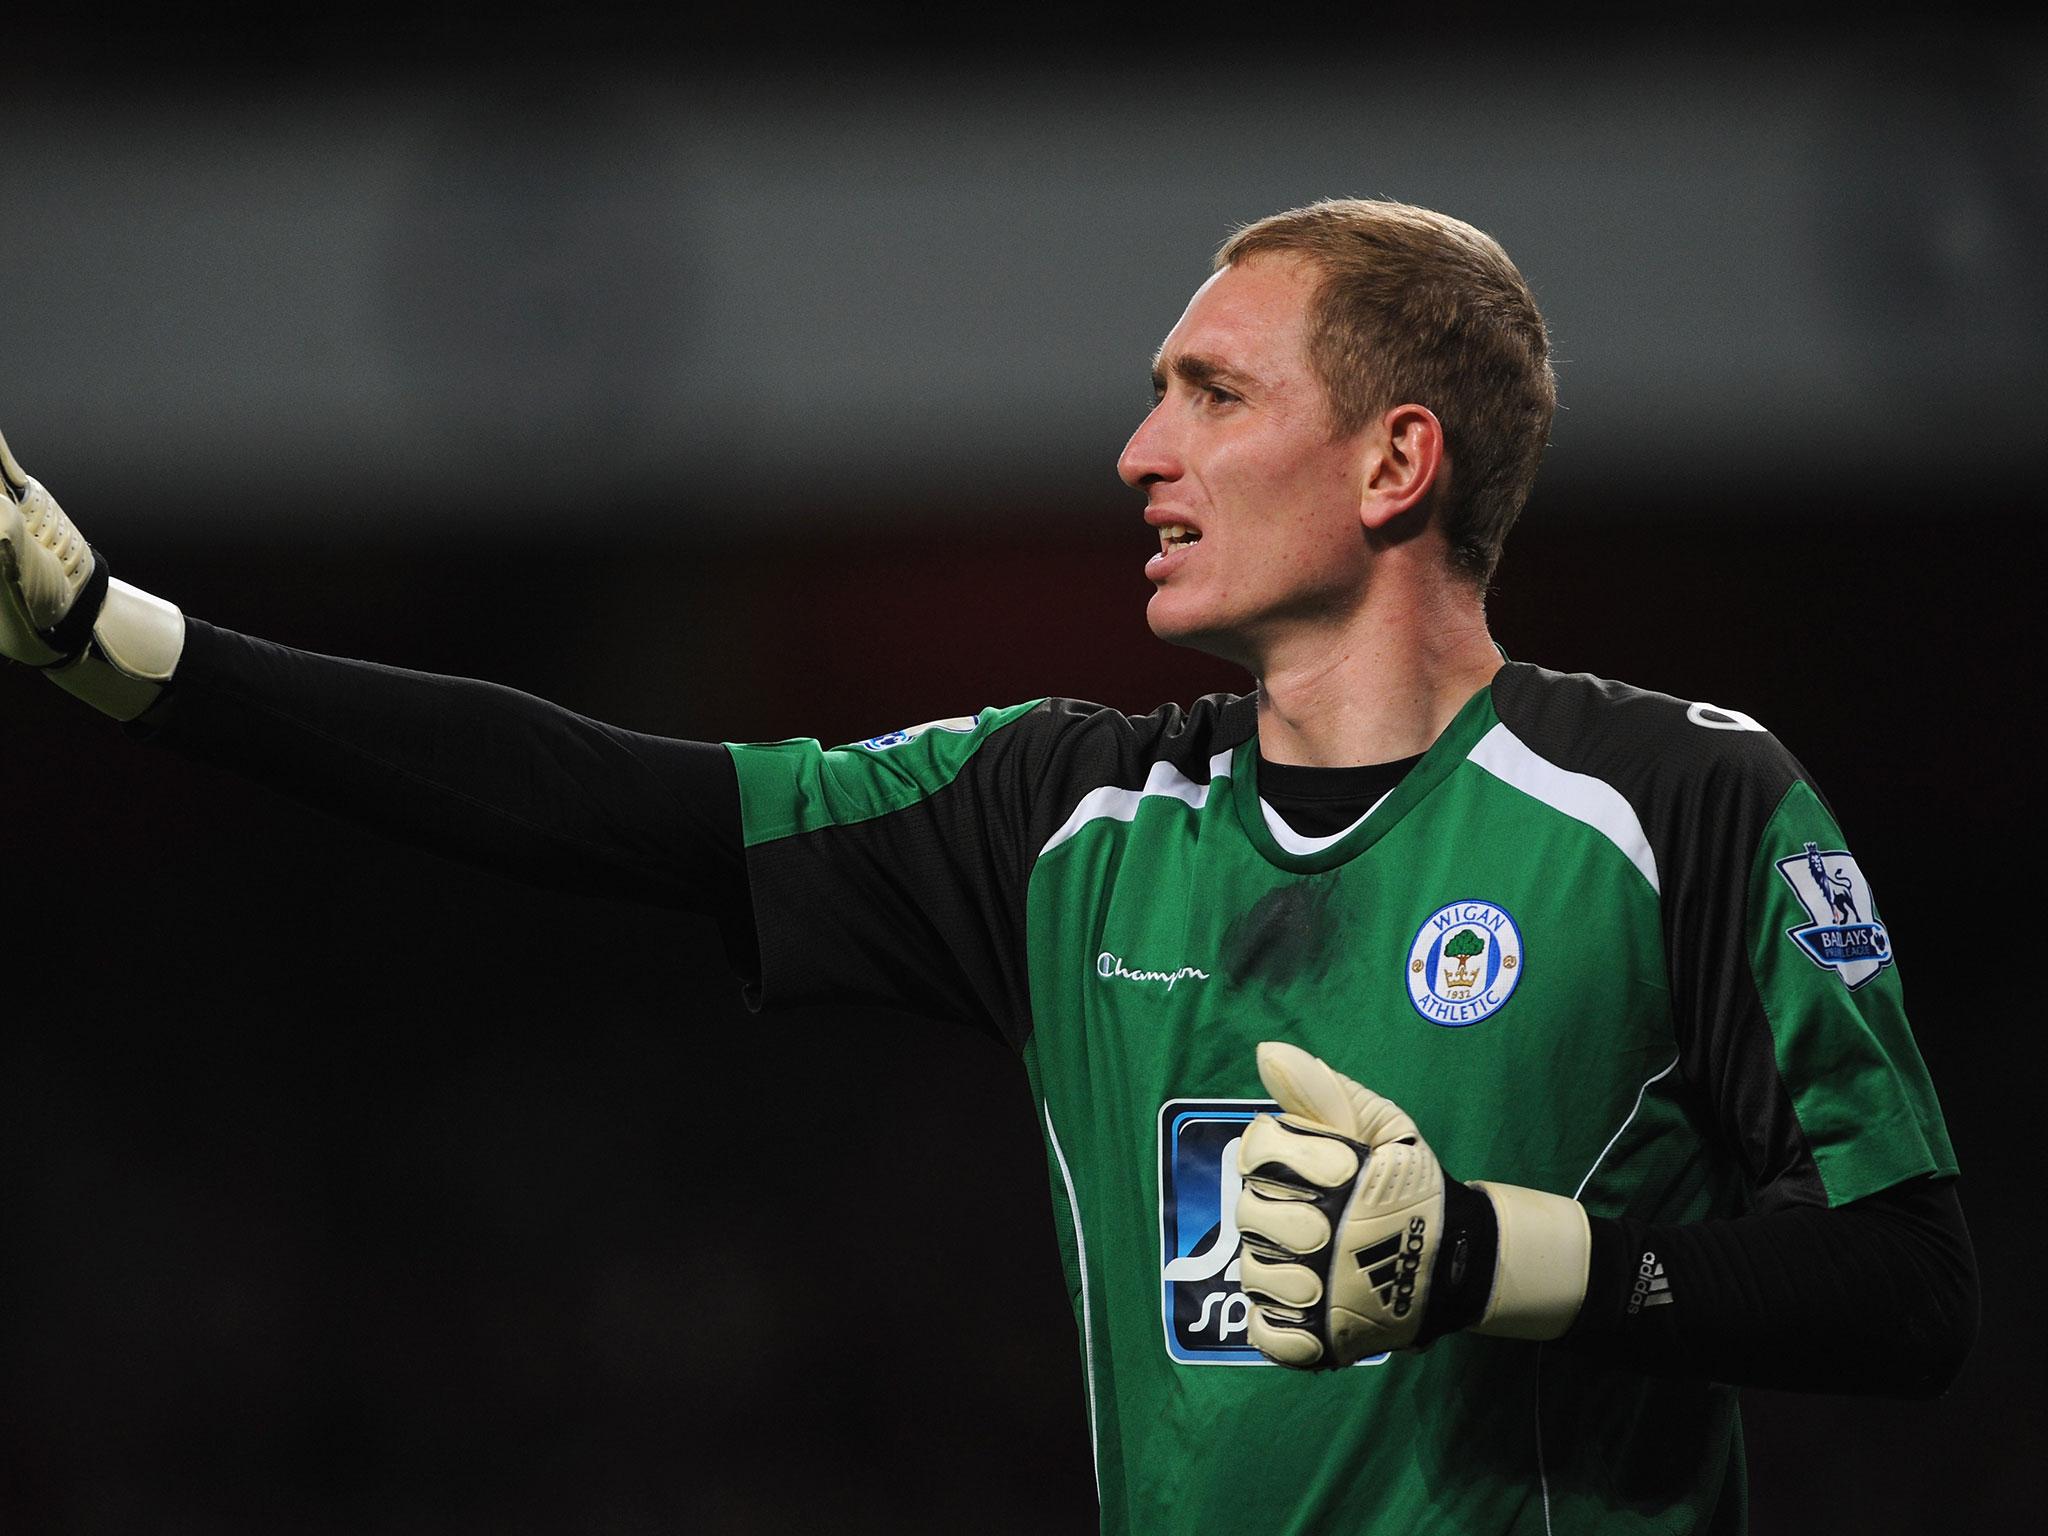 Former Liverpool and England goalkeeper Chris Kirkland opens up about his battle with depression ...